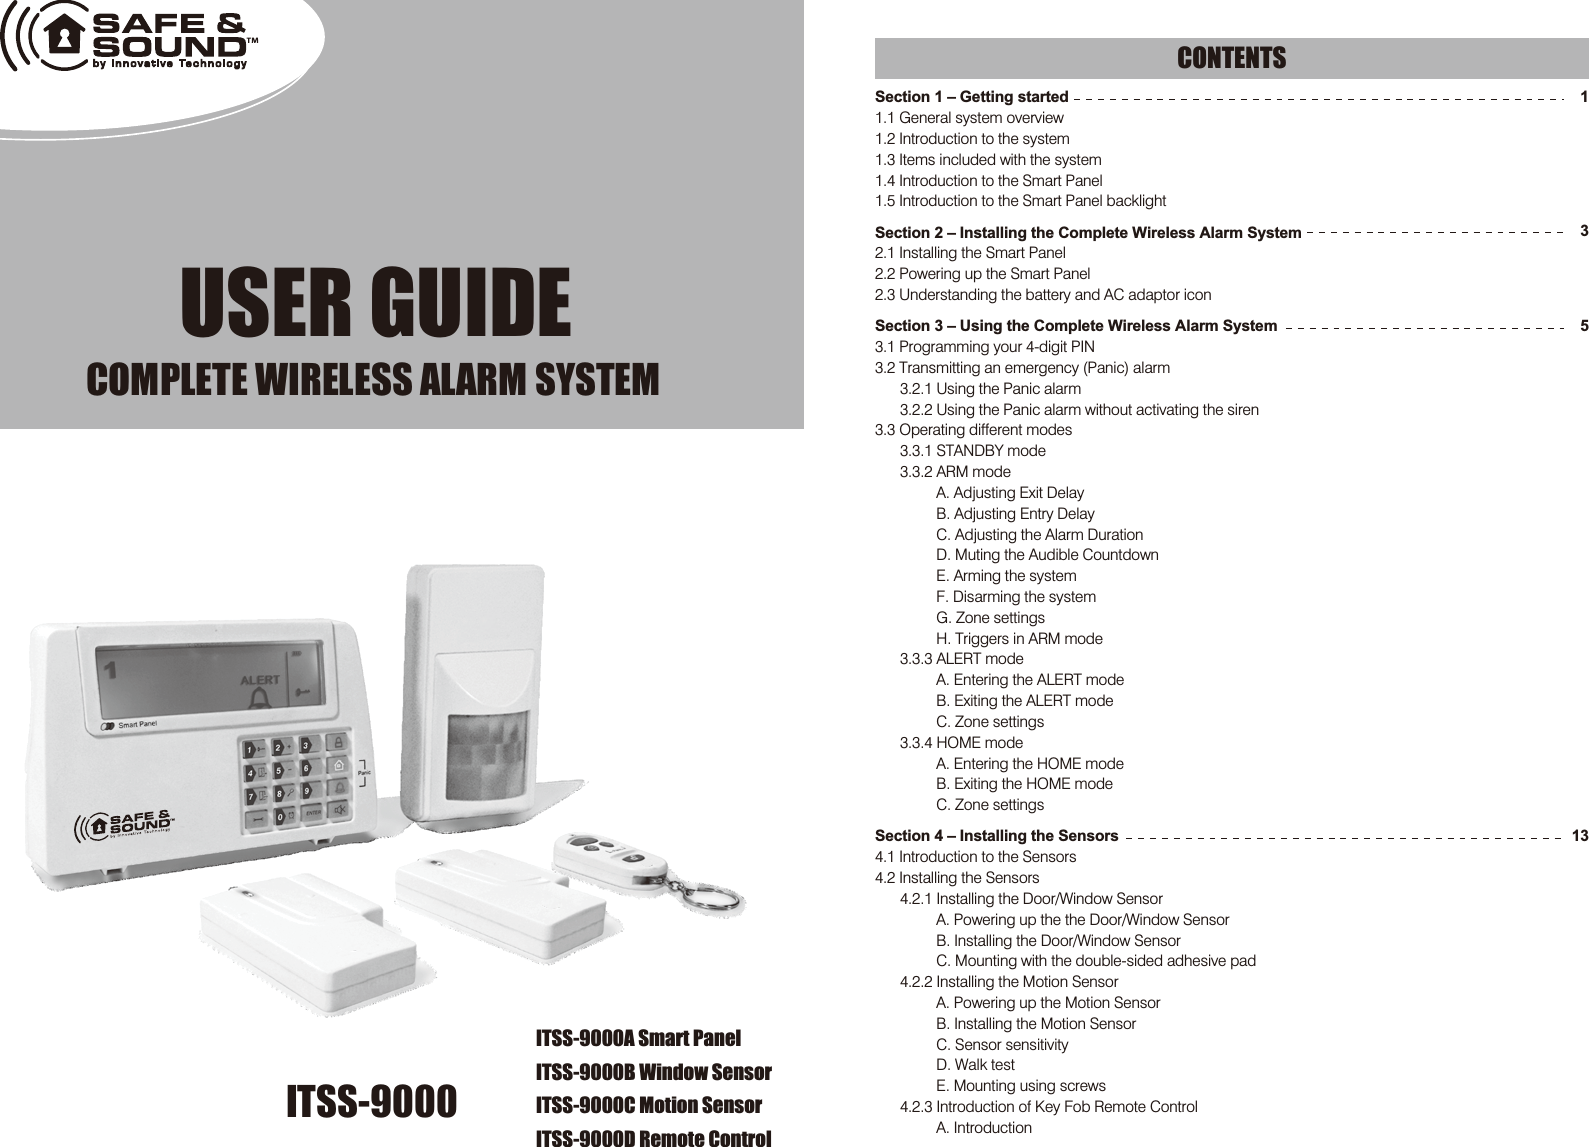 ITSS-9000 USER GUIDECOMPLETE WIRELESS ALARM SYSTEM  Section 1 – Getting started1.1 General system overview1.2 Introduction to the system1.3 Items included with the system1.4 Introduction to the Smart Panel 1.5 Introduction to the Smart Panel backlightSection 2 – Installing the Complete Wireless Alarm System2.1 Installing the Smart Panel 2.2 Powering up the Smart Panel 2.3 Understanding the battery and AC adaptor iconSection 3 – Using the Complete Wireless Alarm System3.1 Programming your 4-digit PIN3.2 Transmitting an emergency (Panic) alarm3.2.1 Using the Panic alarm 3.2.2 Using the Panic alarm without activating the siren3.3 Operating different modes 3.3.1 STANDBY mode3.3.2 ARM modeA. Adjusting Exit DelayB. Adjusting Entry DelayC. Adjusting the Alarm DurationD. Muting the Audible CountdownE. Arming the systemF. Disarming the systemG. Zone settingsH. Triggers in ARM mode3.3.3 ALERT modeA. Entering the ALERT modeB. Exiting the ALERT modeC. Zone settings3.3.4 HOME modeA. Entering the HOME modeB. Exiting the HOME modeC. Zone settings Section 4 – Installing the Sensors4.1 Introduction to the Sensors 4.2 Installing the Sensors4.2.1 Installing the Door/Window SensorA. Powering up the the Door/Window SensorB. Installing the Door/Window SensorC. Mounting with the double-sided adhesive pad4.2.2 Installing the Motion Sensor A. Powering up the Motion Sensor B. Installing the Motion SensorC. Sensor sensitivity D. Walk testE. Mounting using screws4.2.3 Introduction of Key Fob Remote ControlA. IntroductionCONTENTS13513ITSS-9000A Smart PanelITSS-9000B Window SensorITSS-9000C Motion SensorITSS-9000D Remote Control